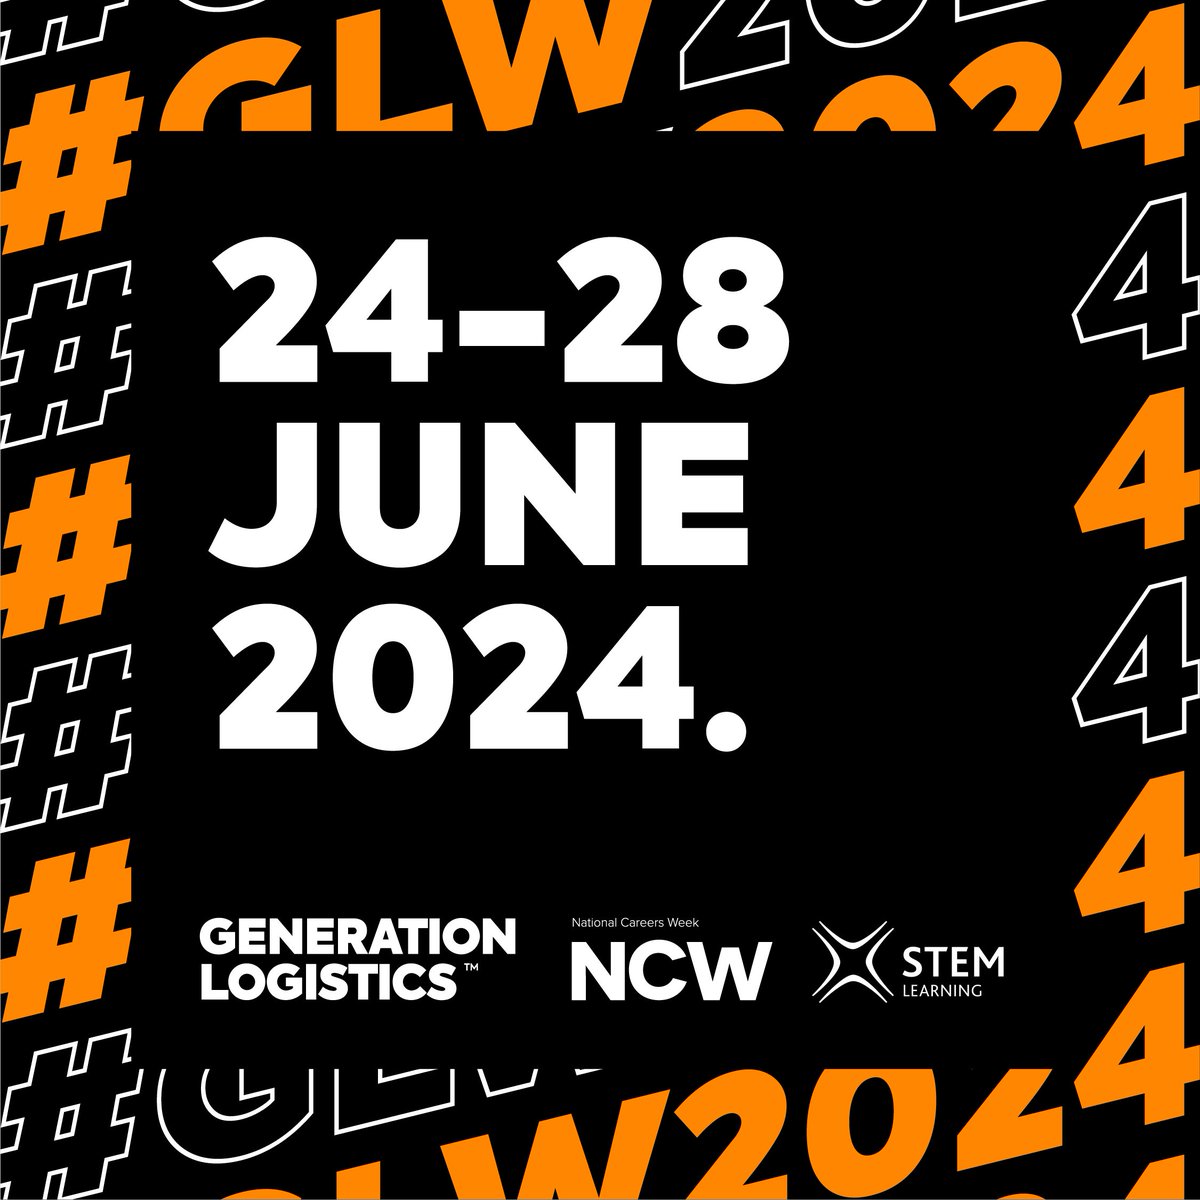 The logistics world is so diverse with myriad opportunities along the chain.

Let's dive & learn more  about the logistics world as we celebrate Generation Logistics Week 2024.
#TVET 
 #GLW2024 @CareersWeek @VUKampala @kabuniversity  @Gen_Logistics